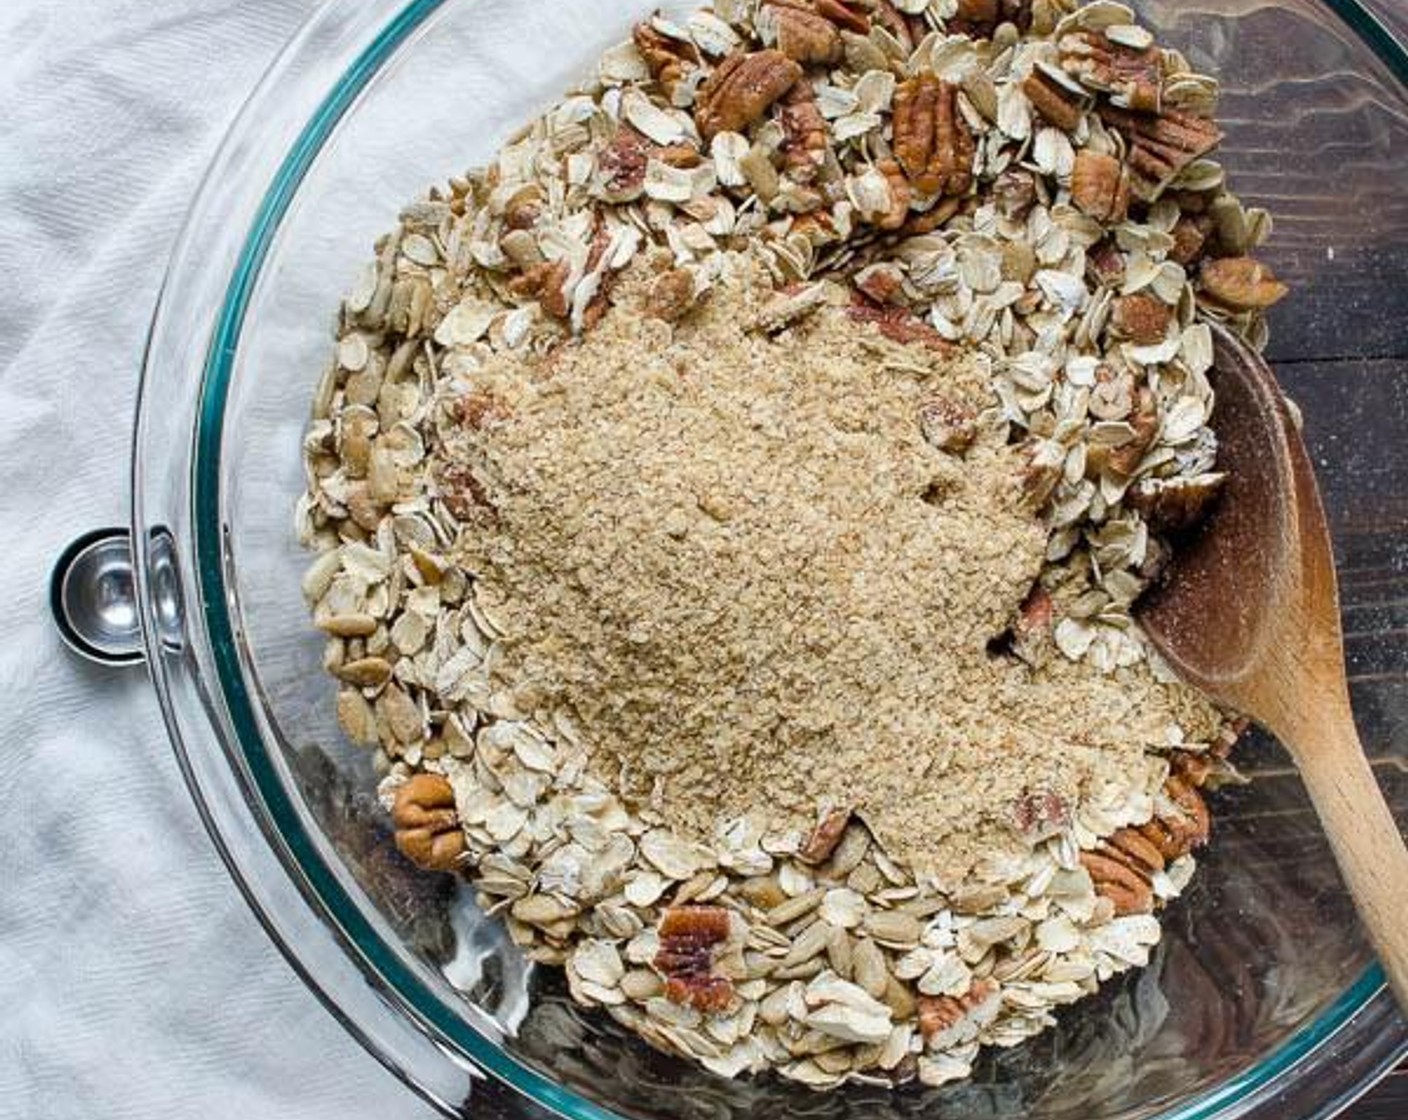 step 2 In a large bowl combine the Old Fashioned Rolled Oats (2 1/2 cups), Pecans (1 cup), Shelled Sunflower Seeds (1/2 cup), Wheat Germ (1/3 cup), stir to combine.